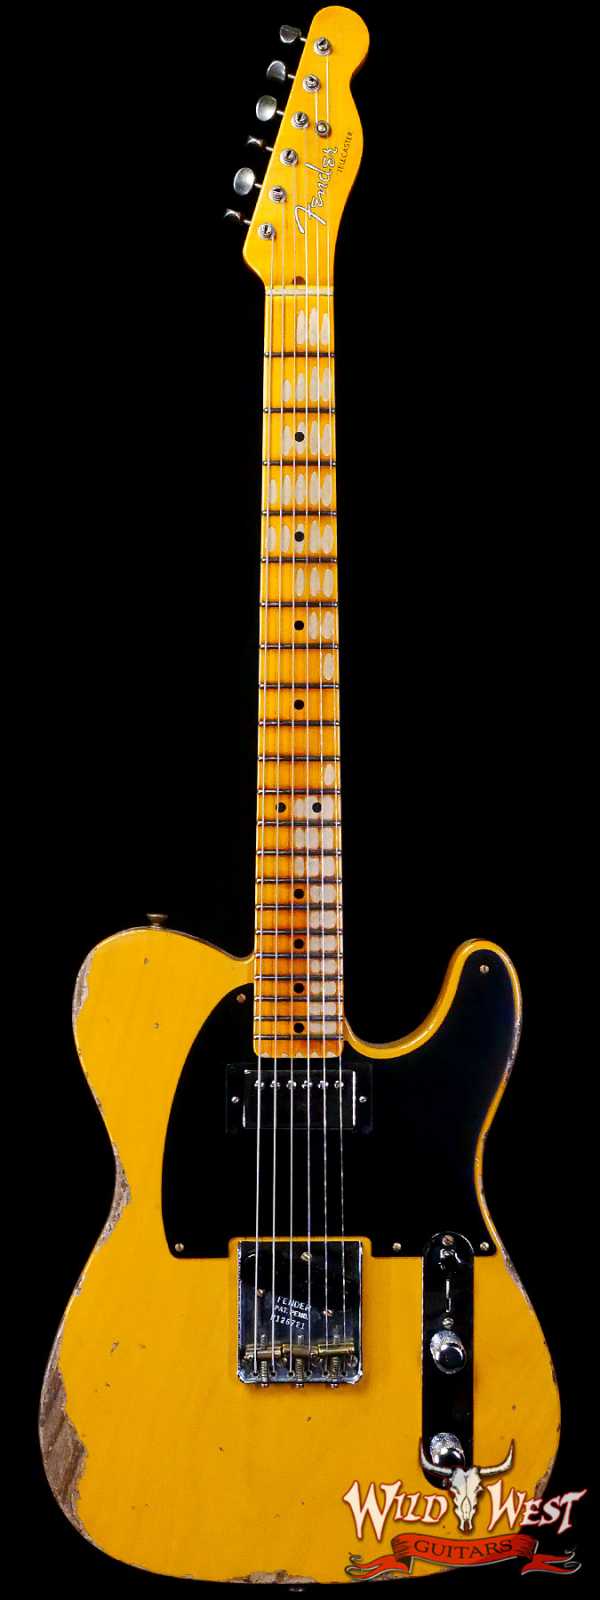 Fender Custom Shop Limited Edition 1951 Telecaster HS Hand-Wound Pickup Heavy Relic Aged Butterscotch Blonde